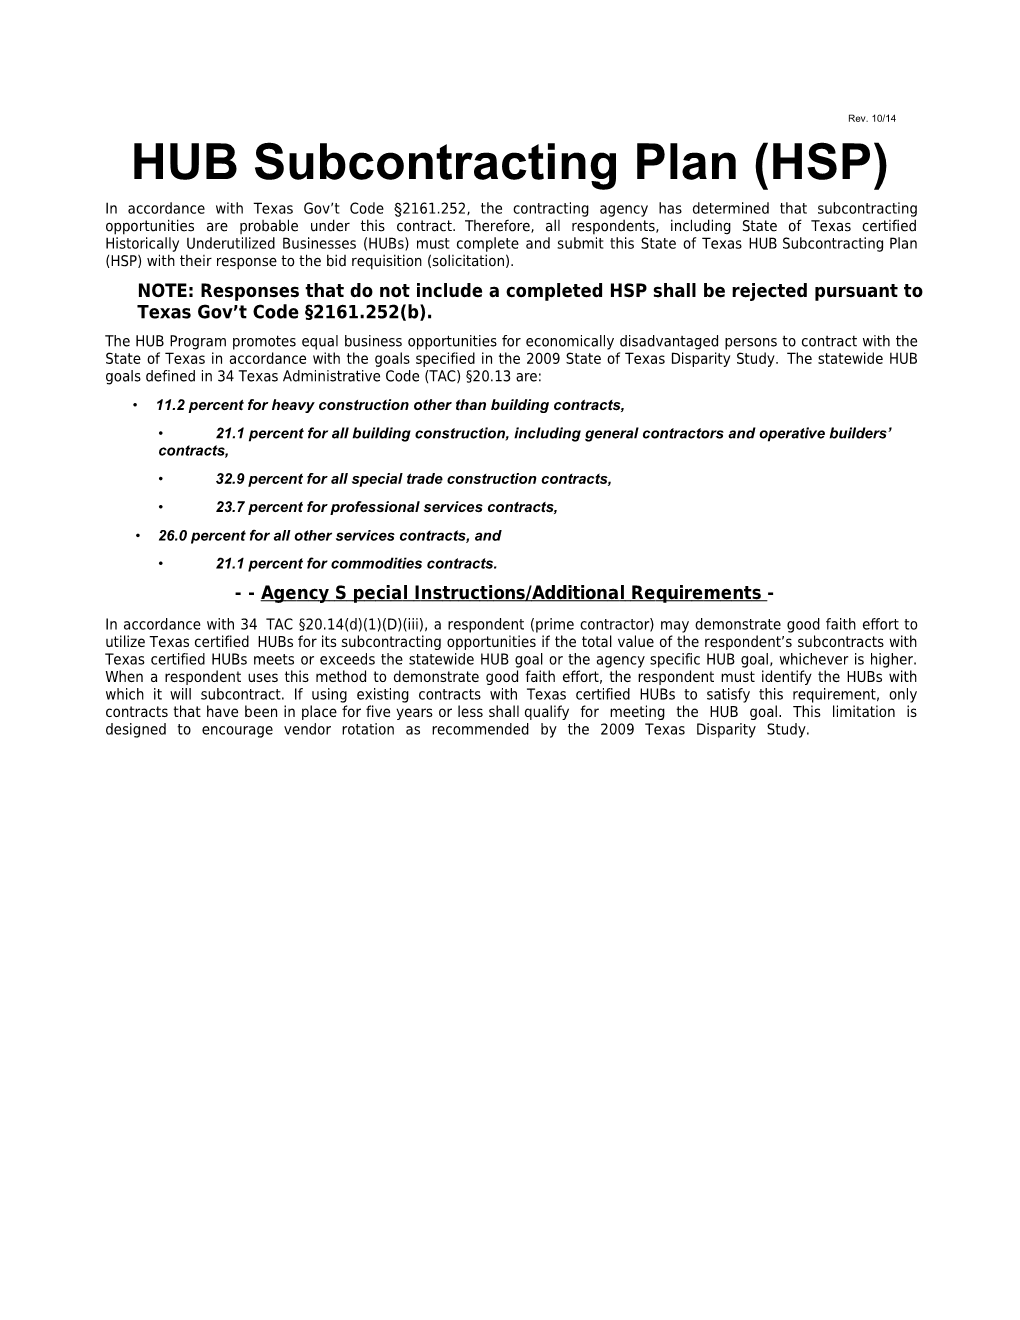 DIR-TSO-3131 Appendix B HUB Subcontracting Plan (Approved on 09-08-15)